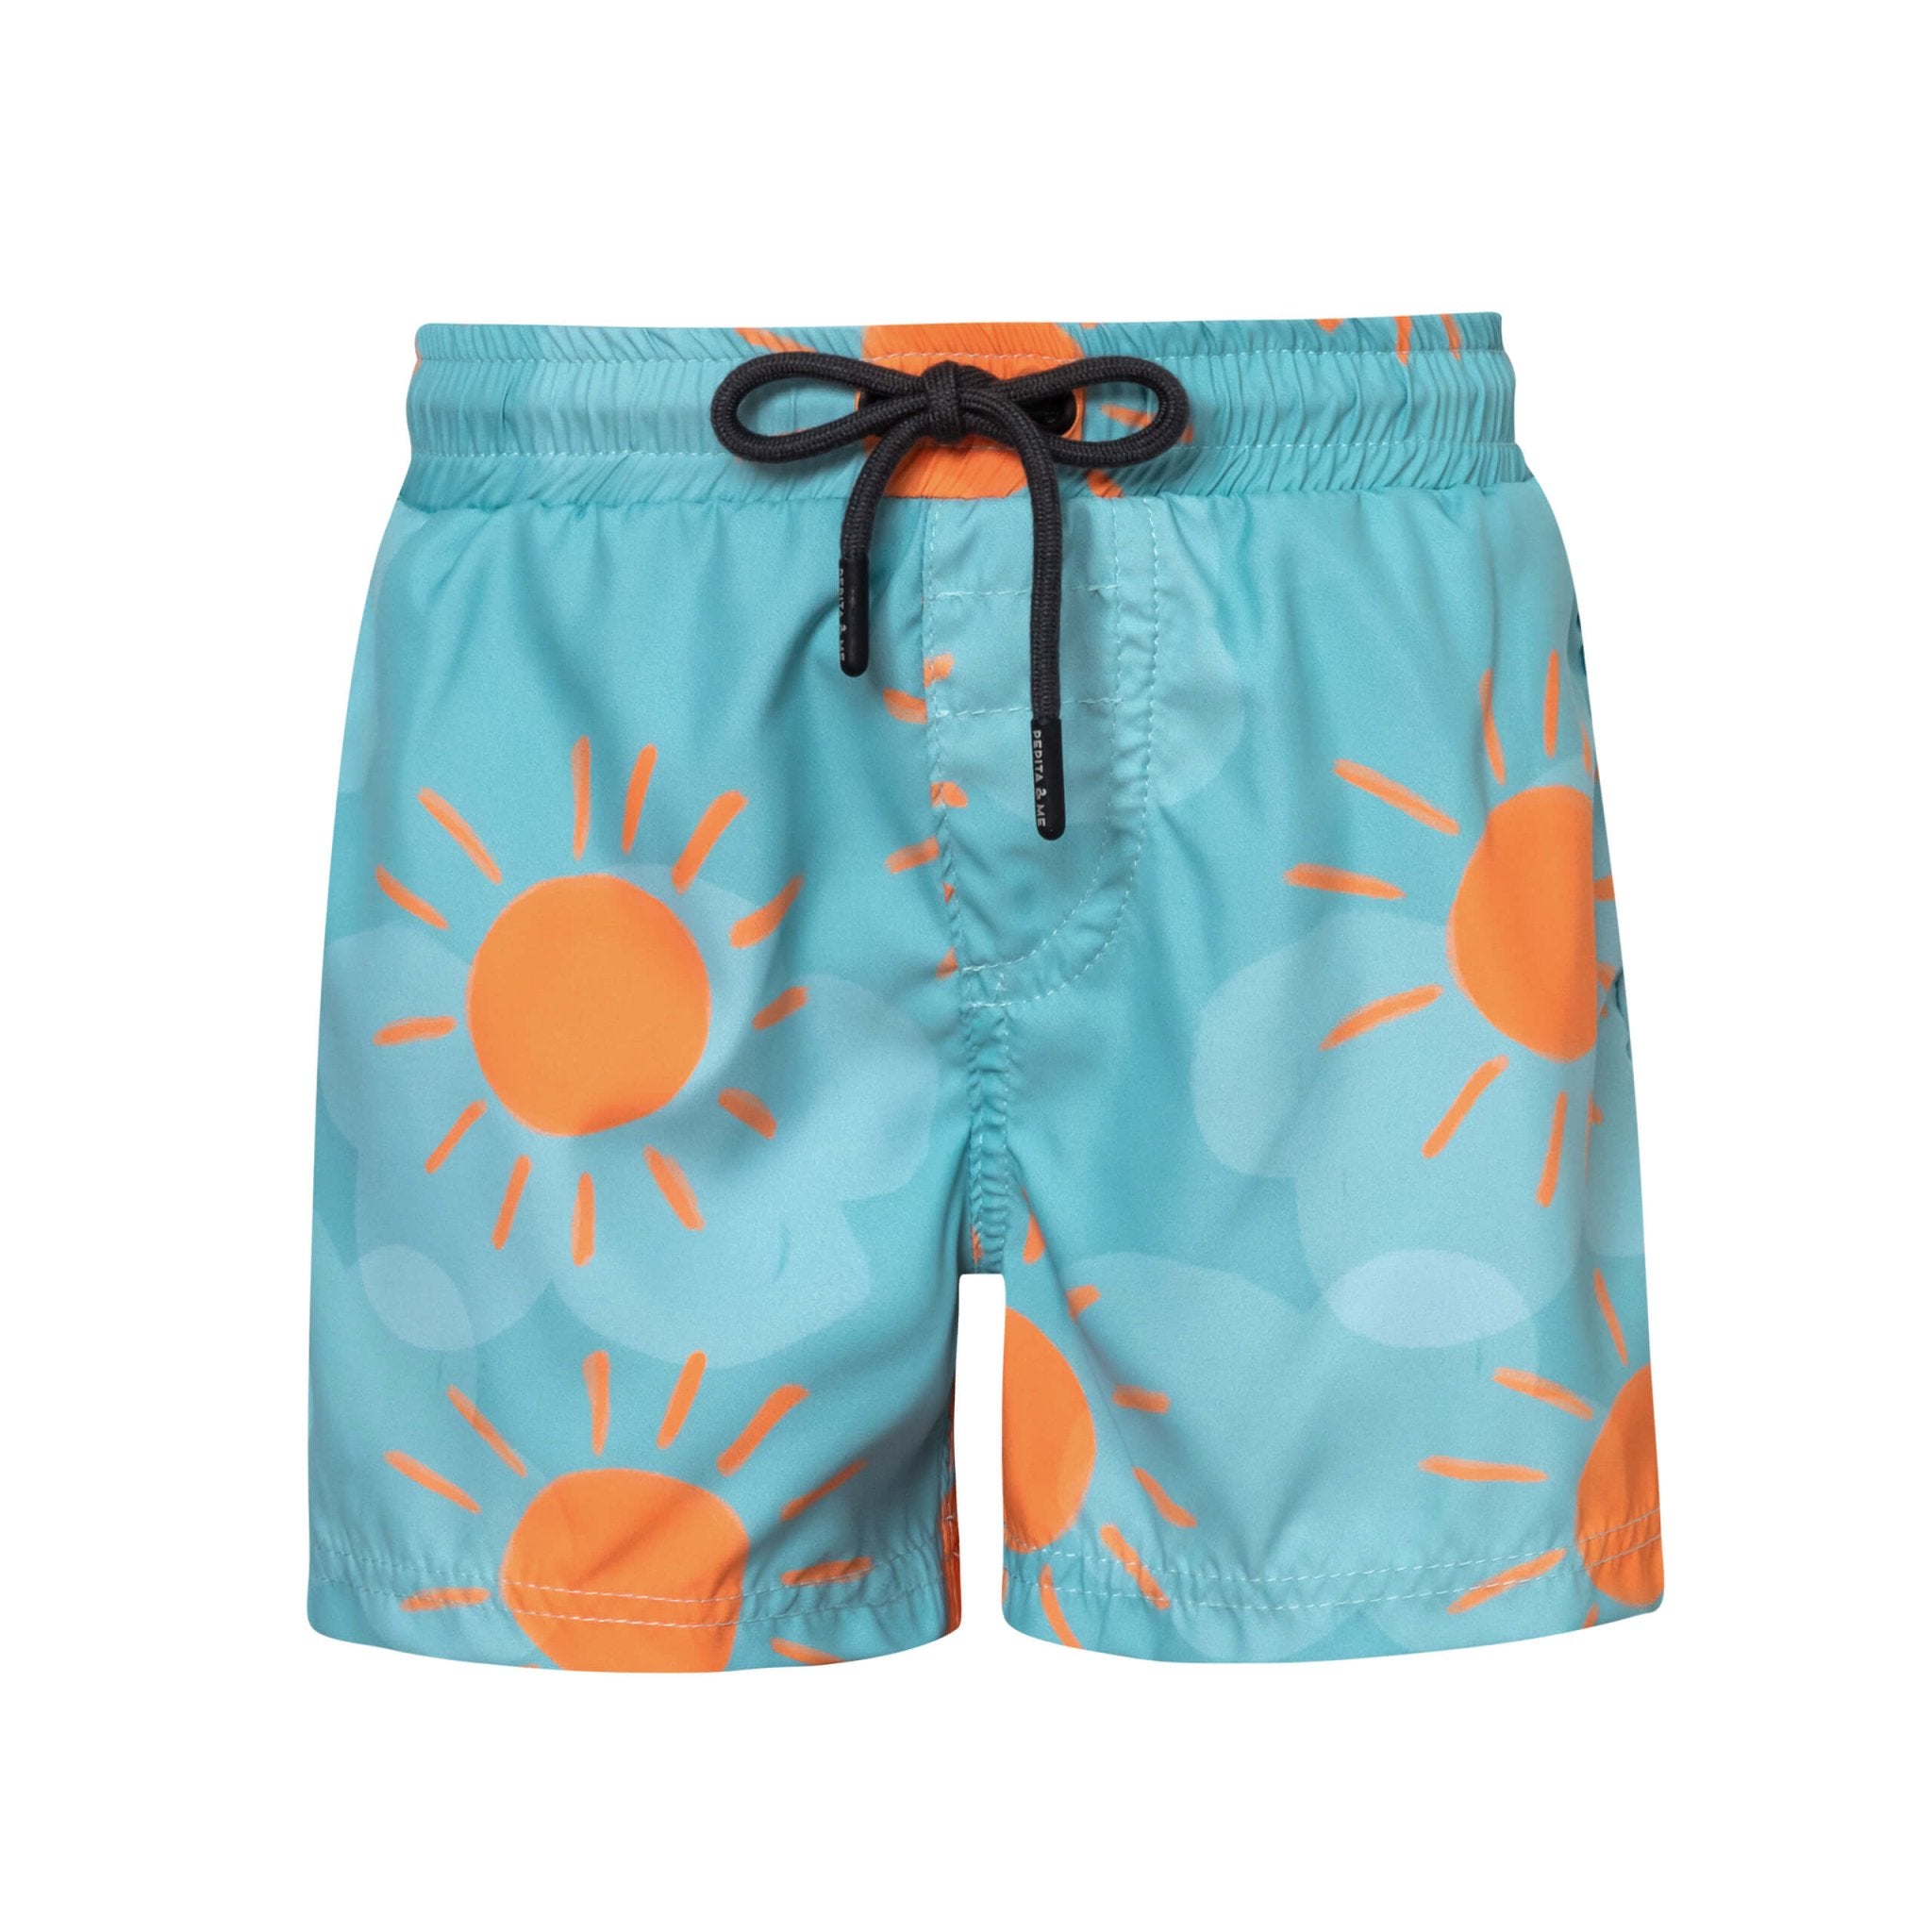 Sky blue swimshorts with a sun and cloud pattern. These shorts have a black adjustable drawstring. The front of the shorts are shown over a white background.